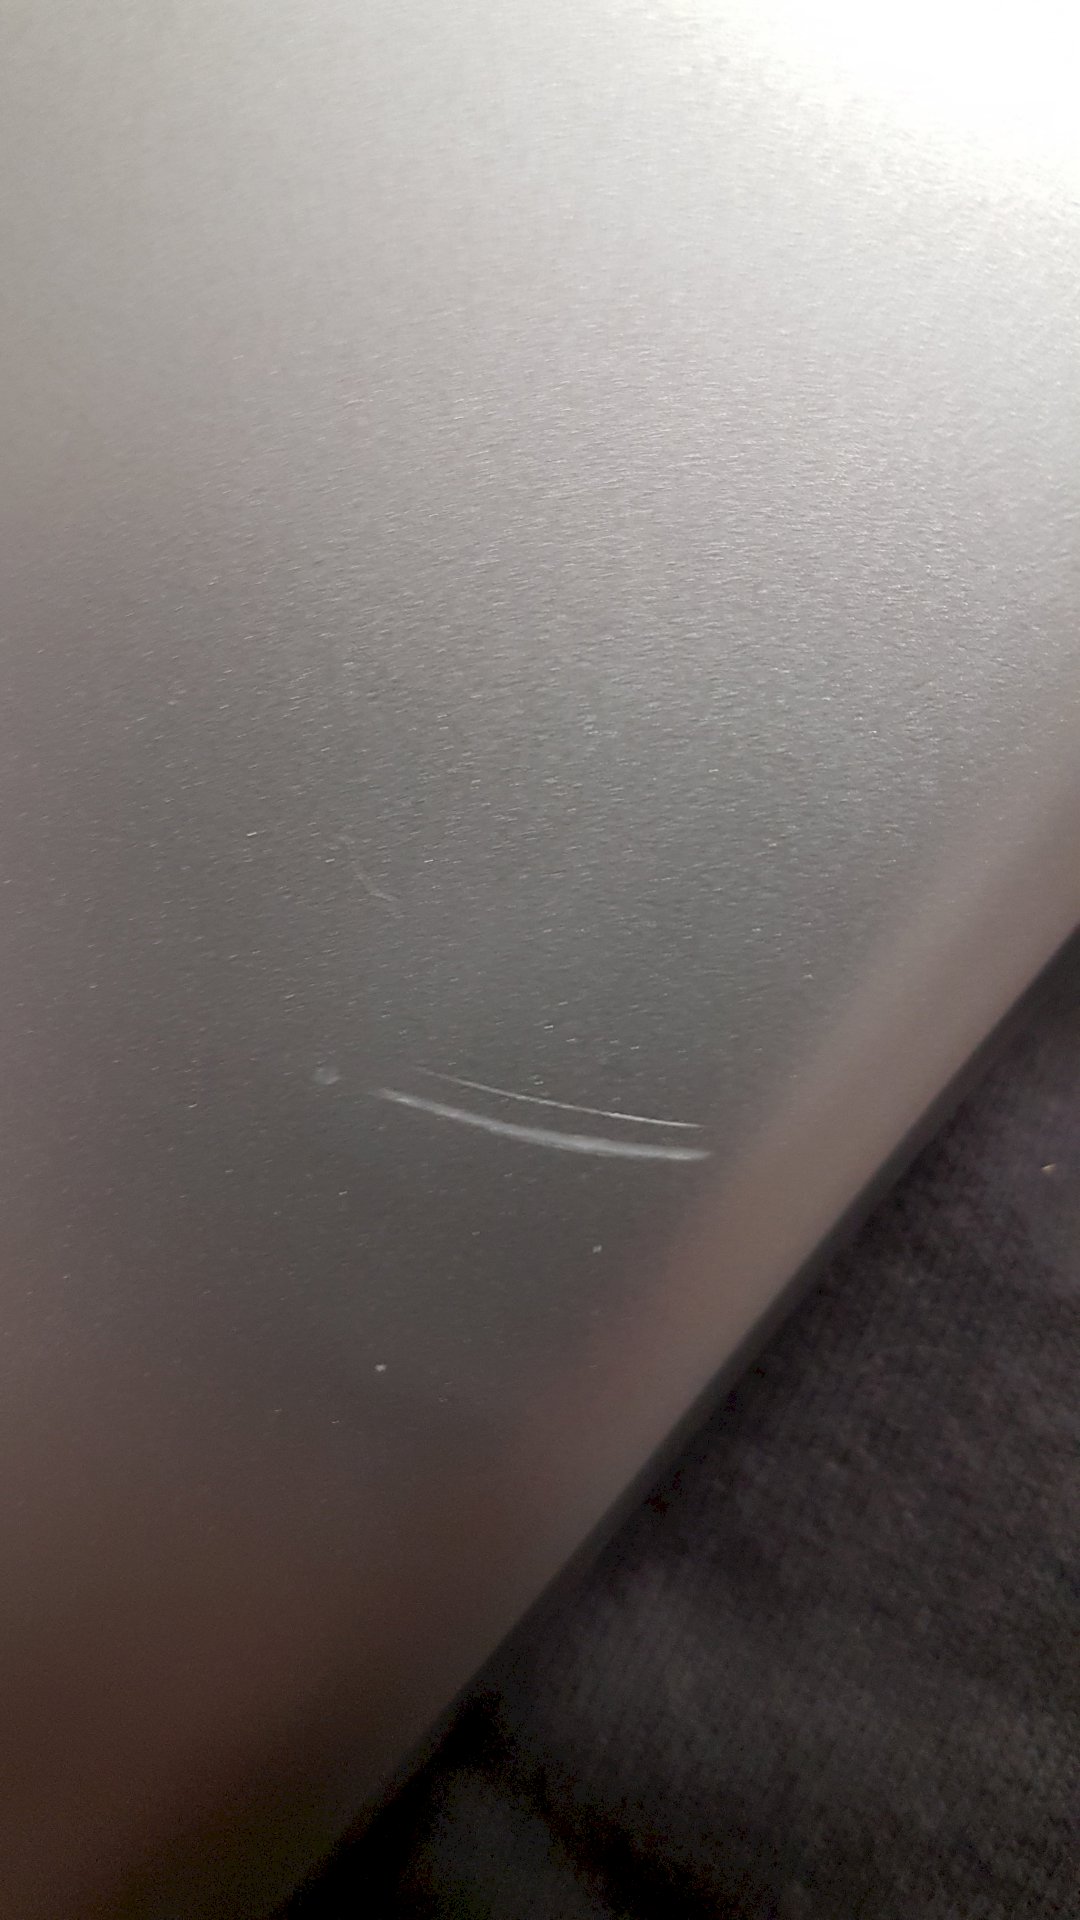 How to remove scratches from a laptop